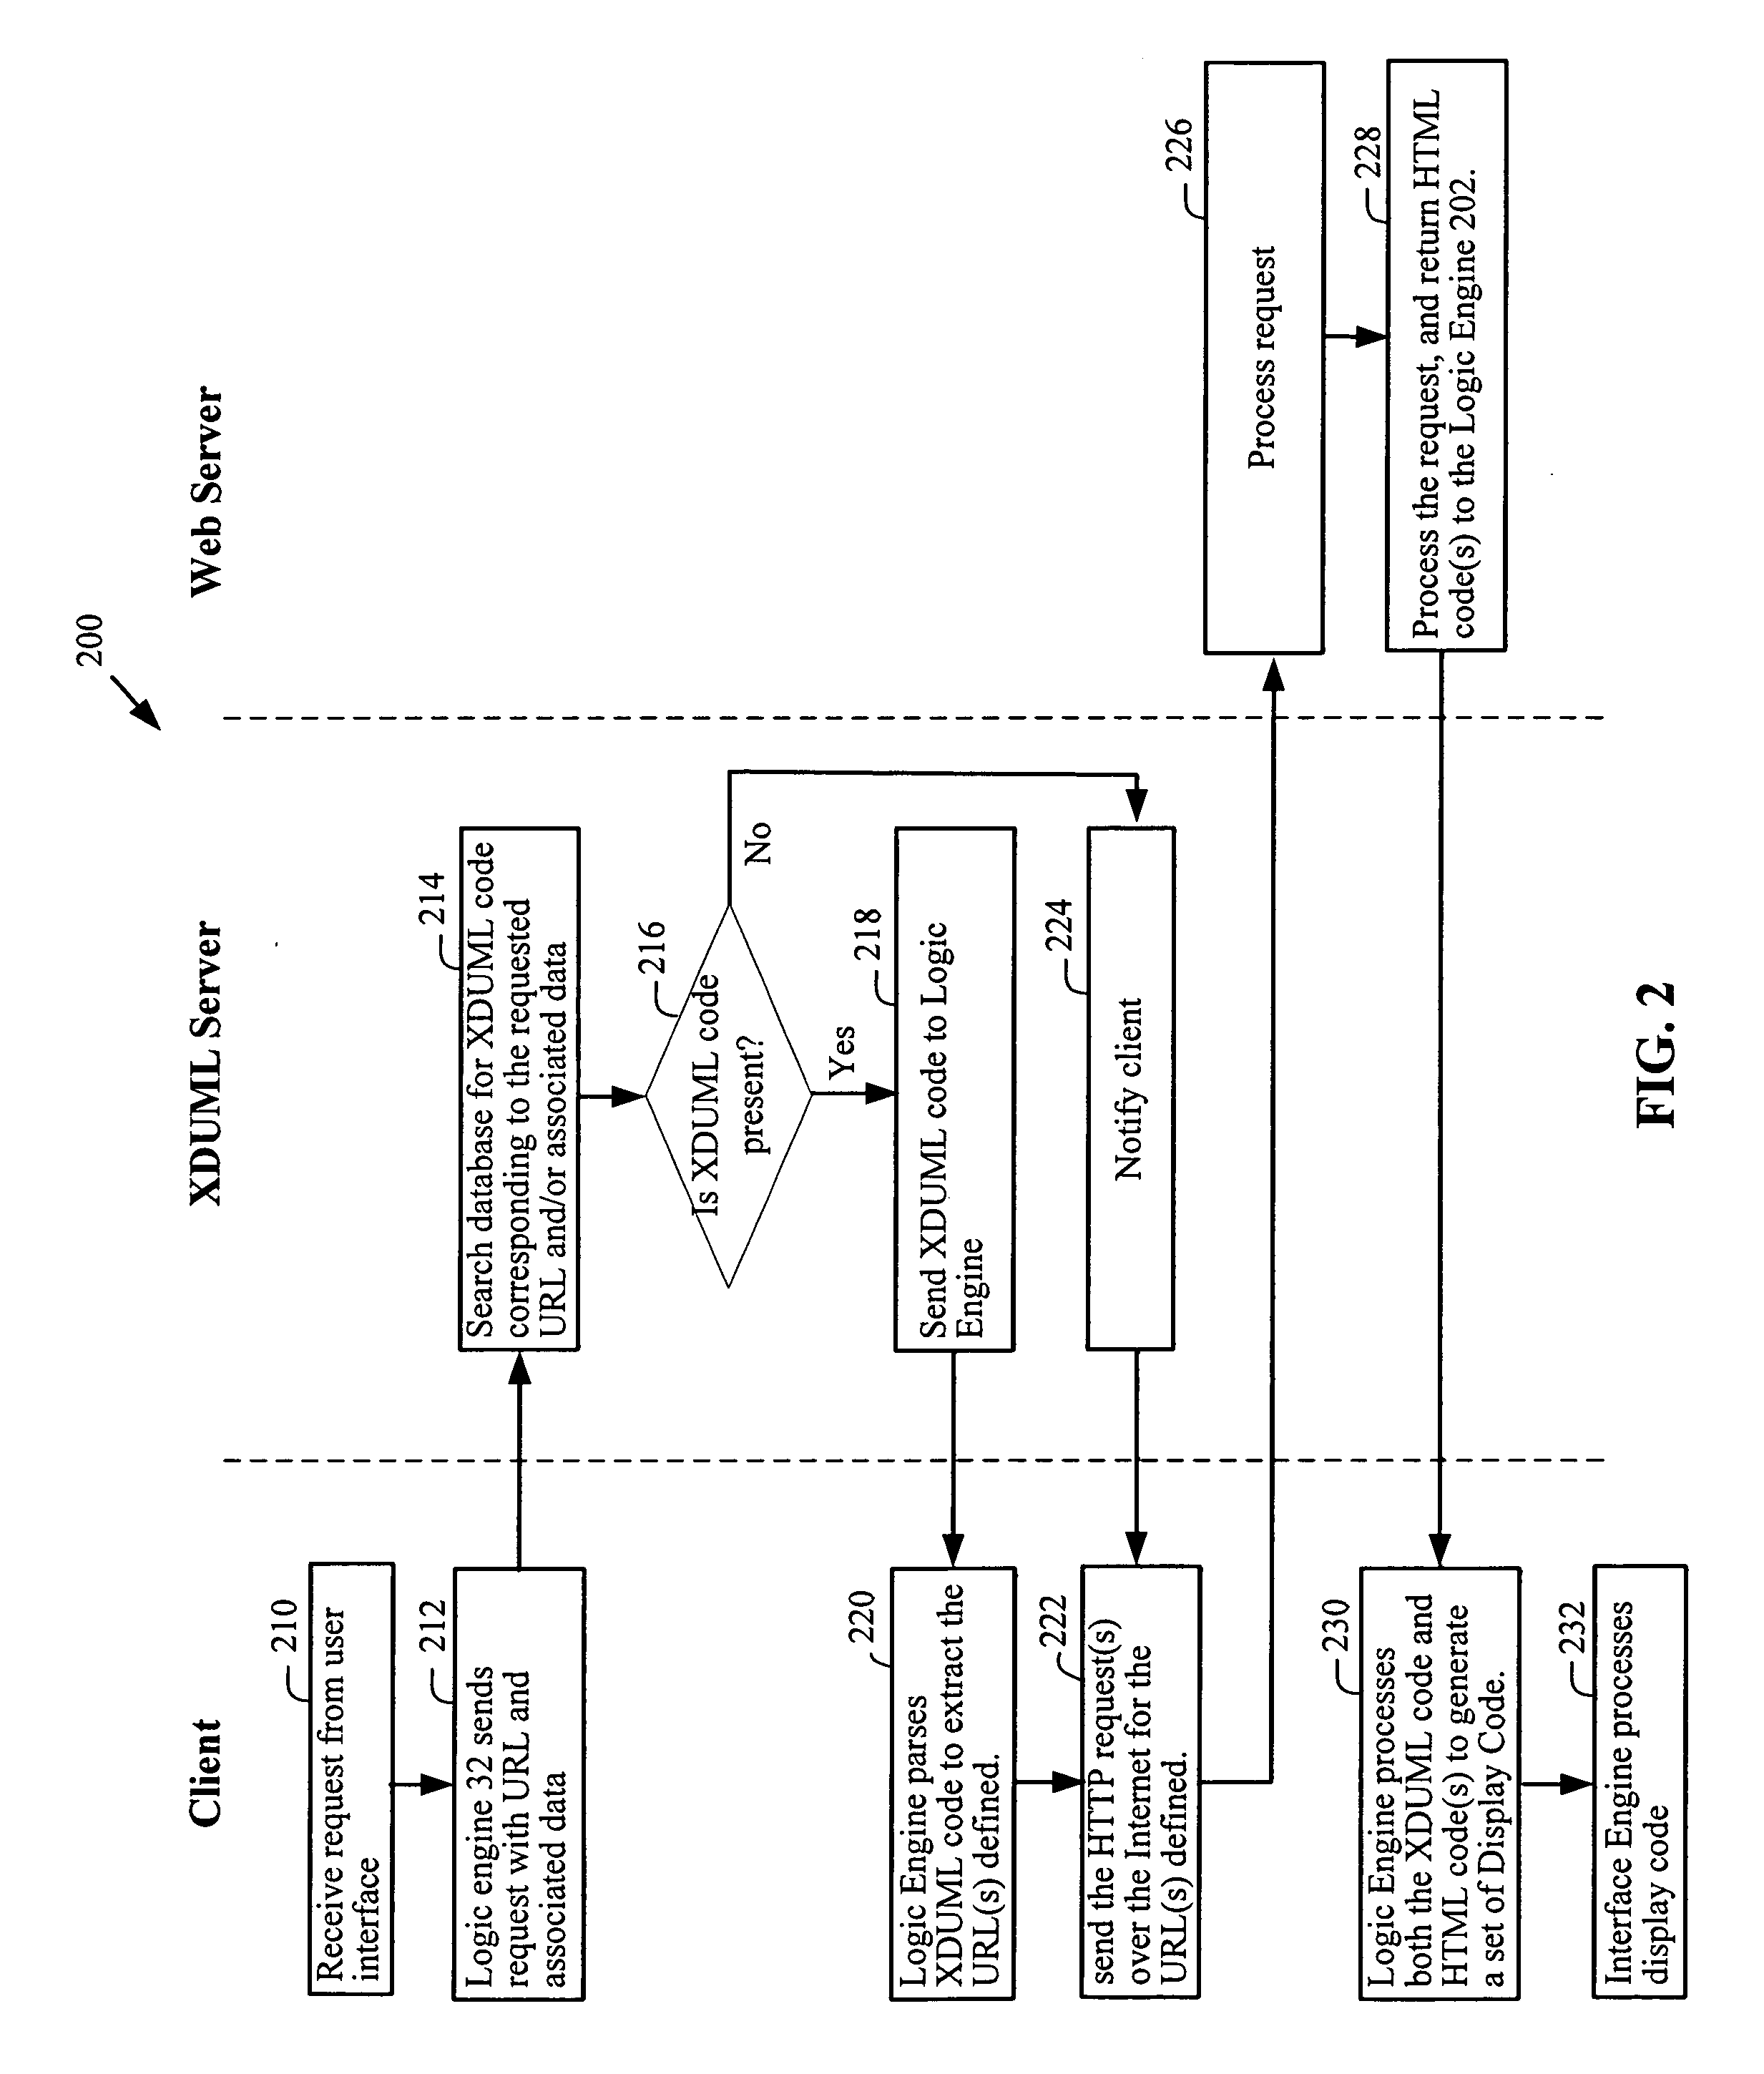 Systems and methods for creating customized applications